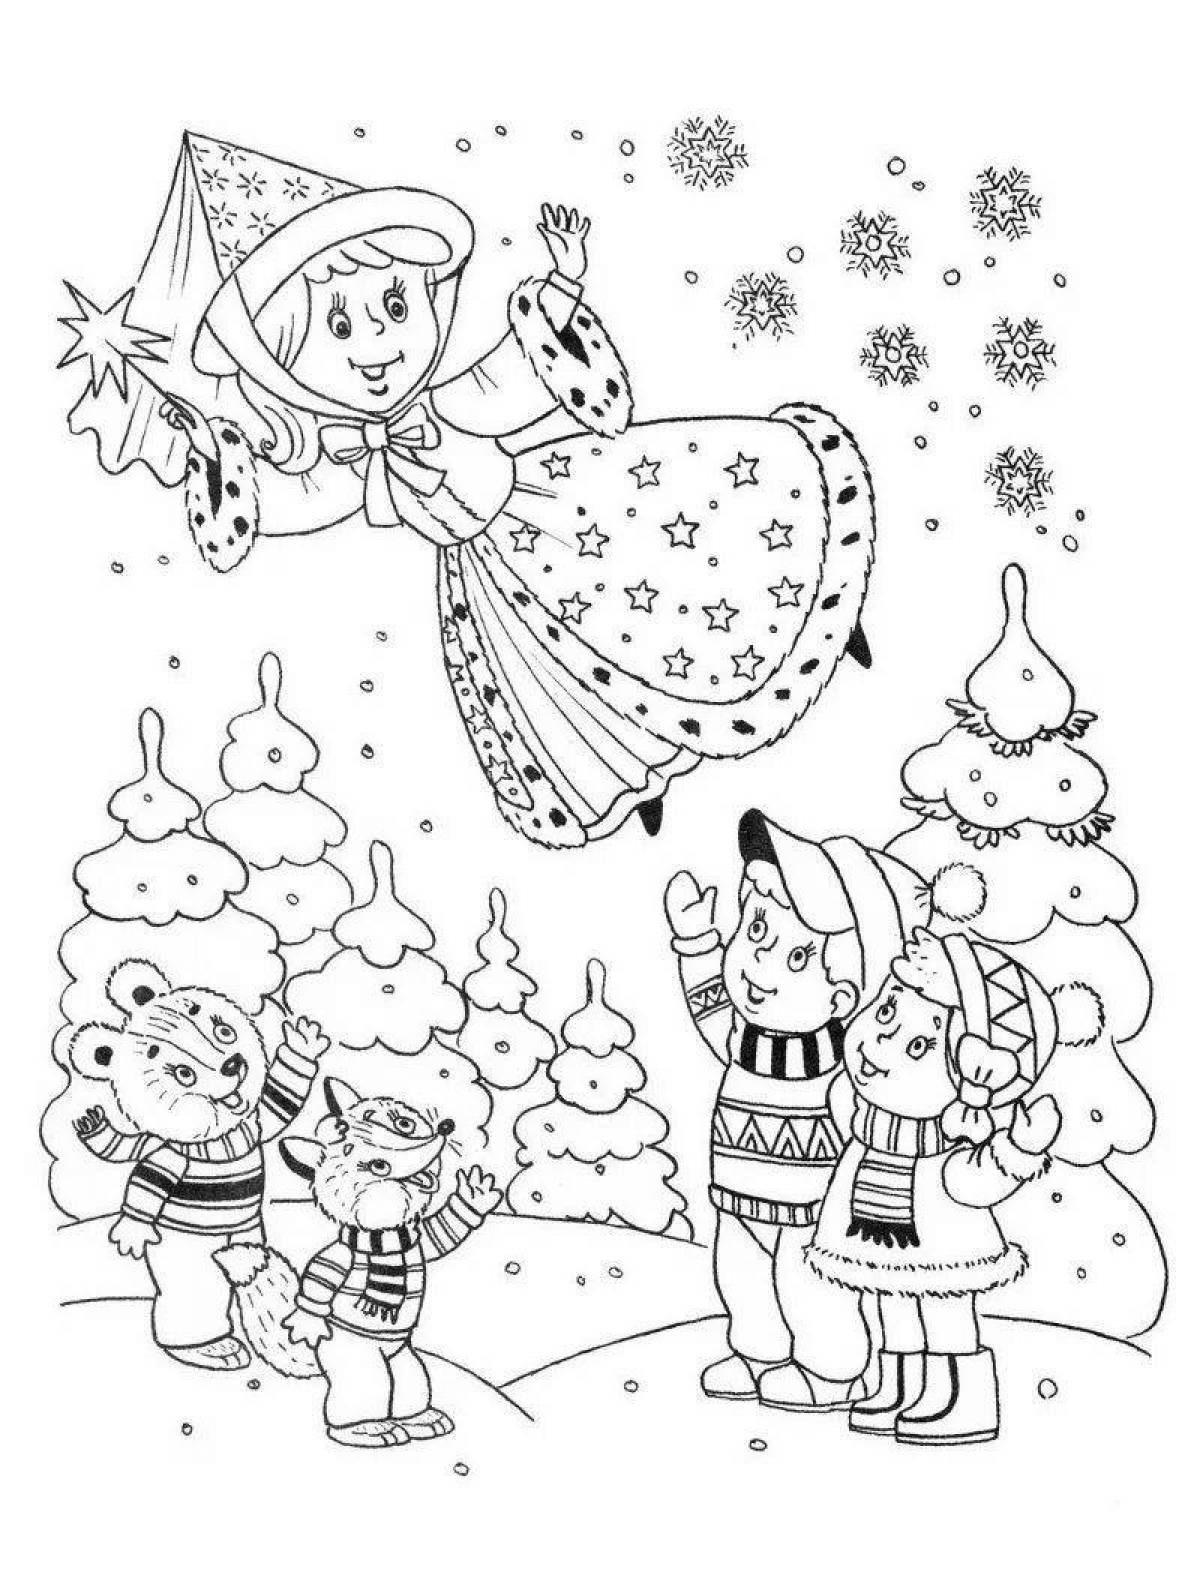 Adorable winter coloring book for 8 year olds